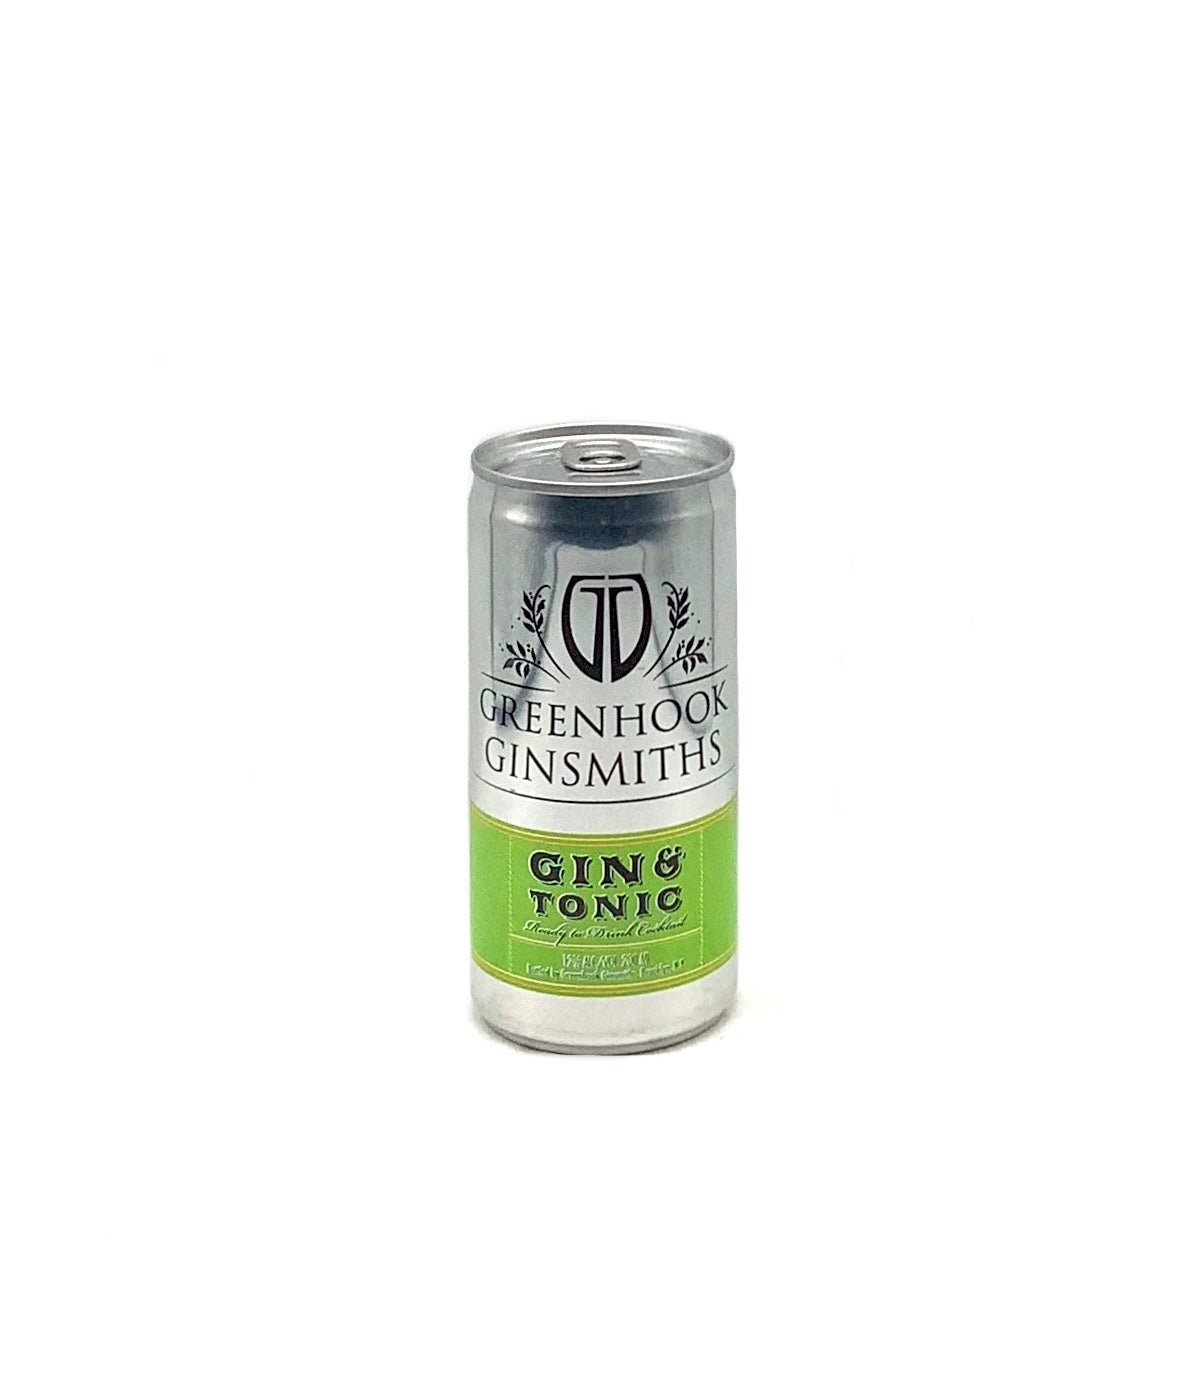 Greenhook Ginsmiths Gin and Tonic 200ml can